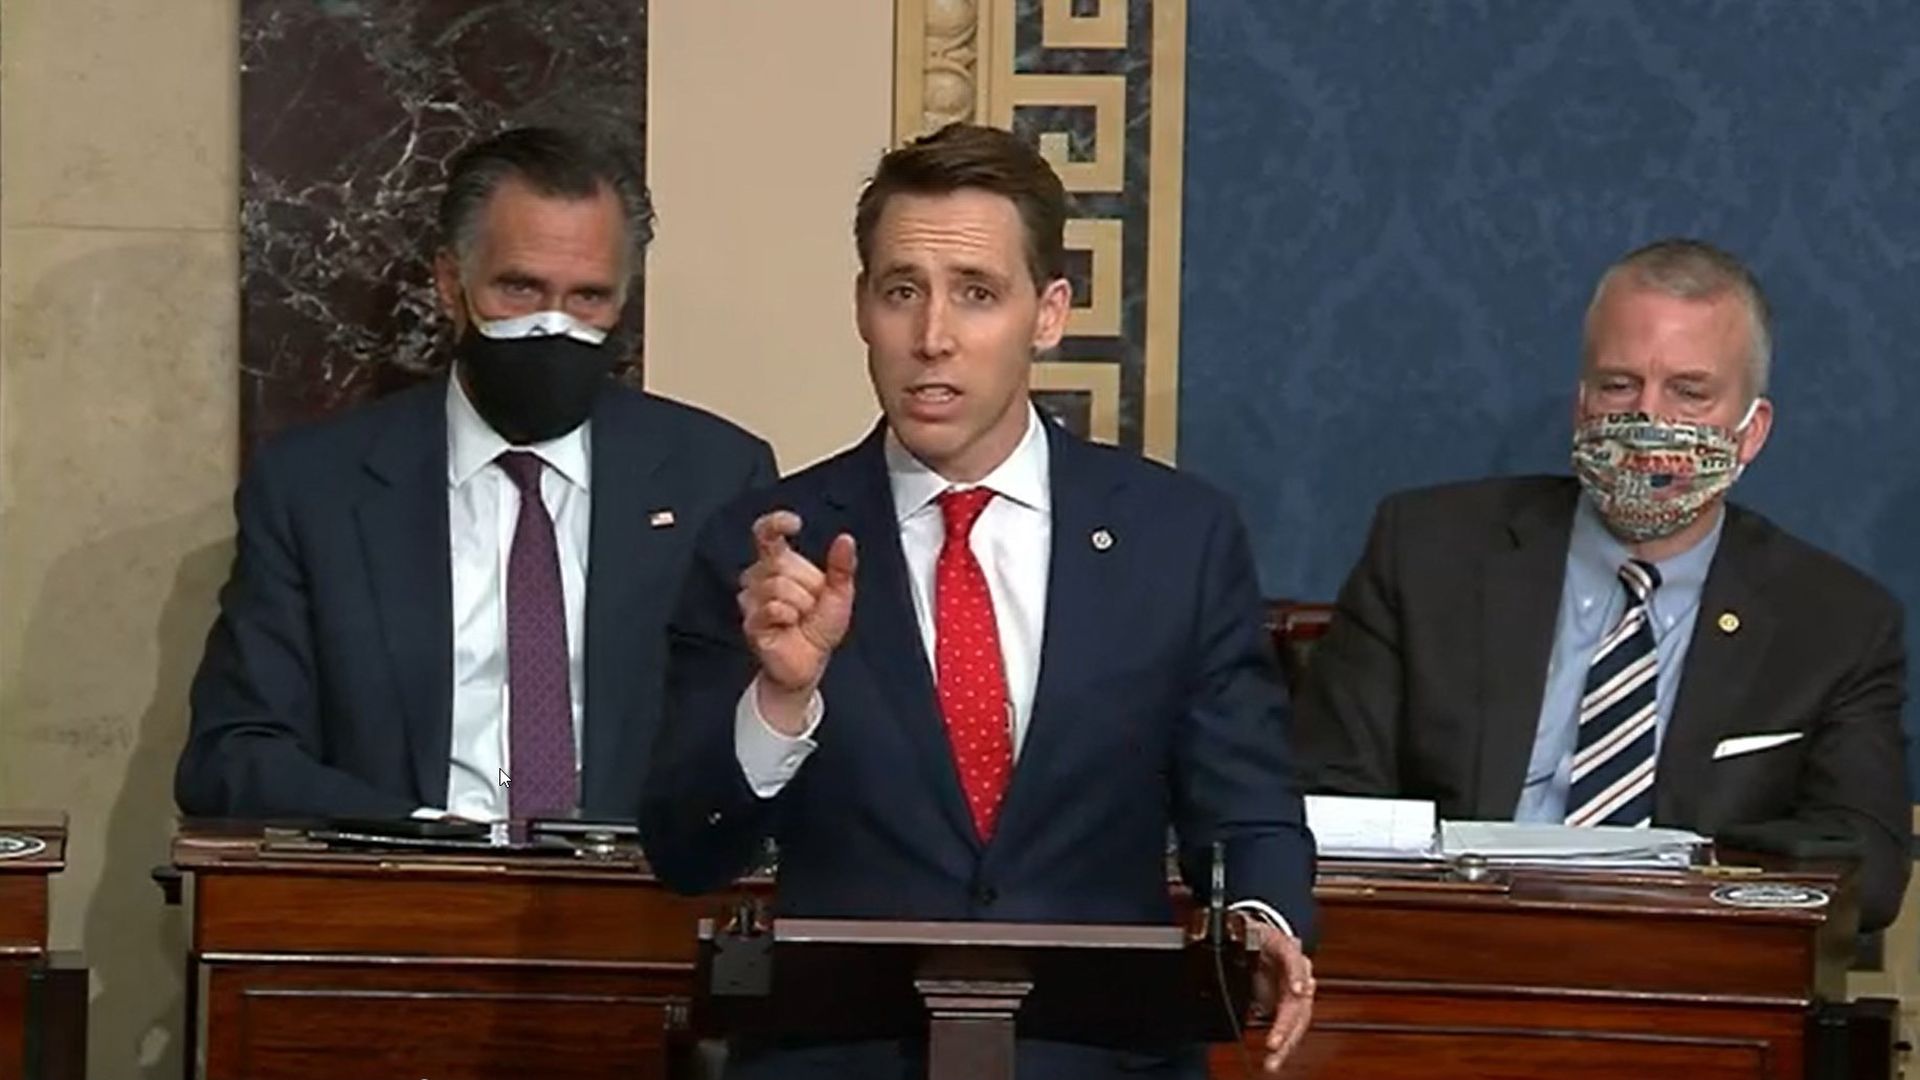 Sen. Josh Hawley is seen addressing his challenge to the 2020 election results just hours after the U.S. Capitol siege.